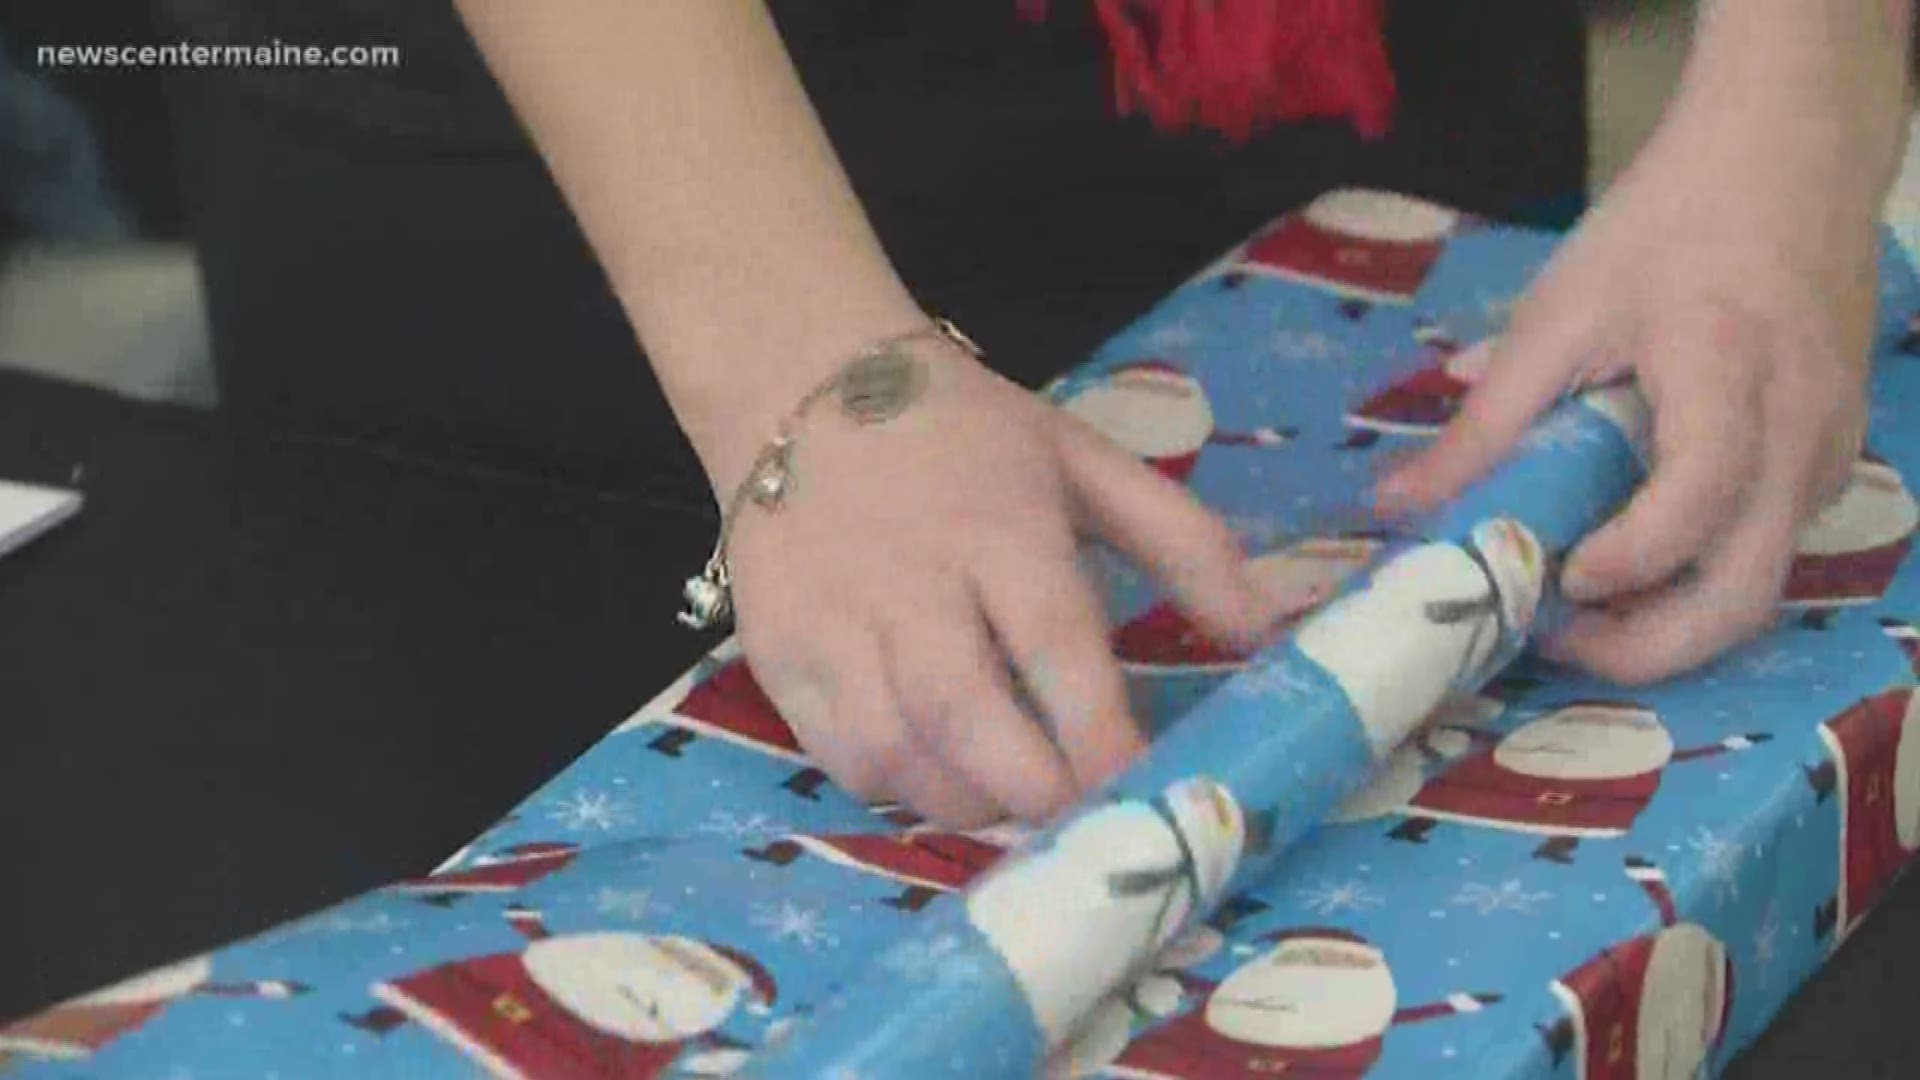 If you don't want to wrap your gifts, the IRIS Network has you covered at the Maine Mall